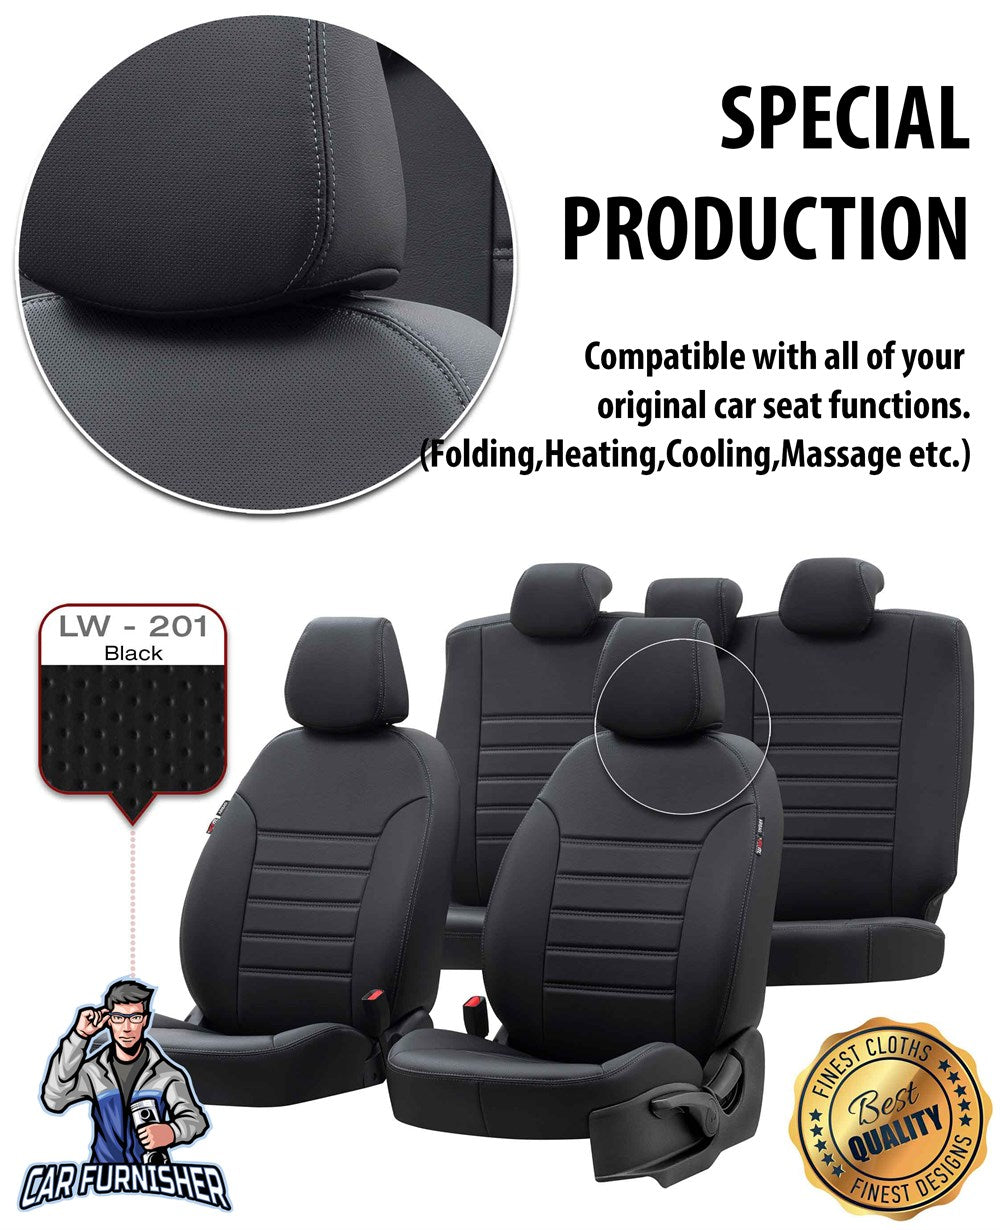 Volkswagen Jetta Seat Cover Istanbul Leather Design Smoked Black Leather